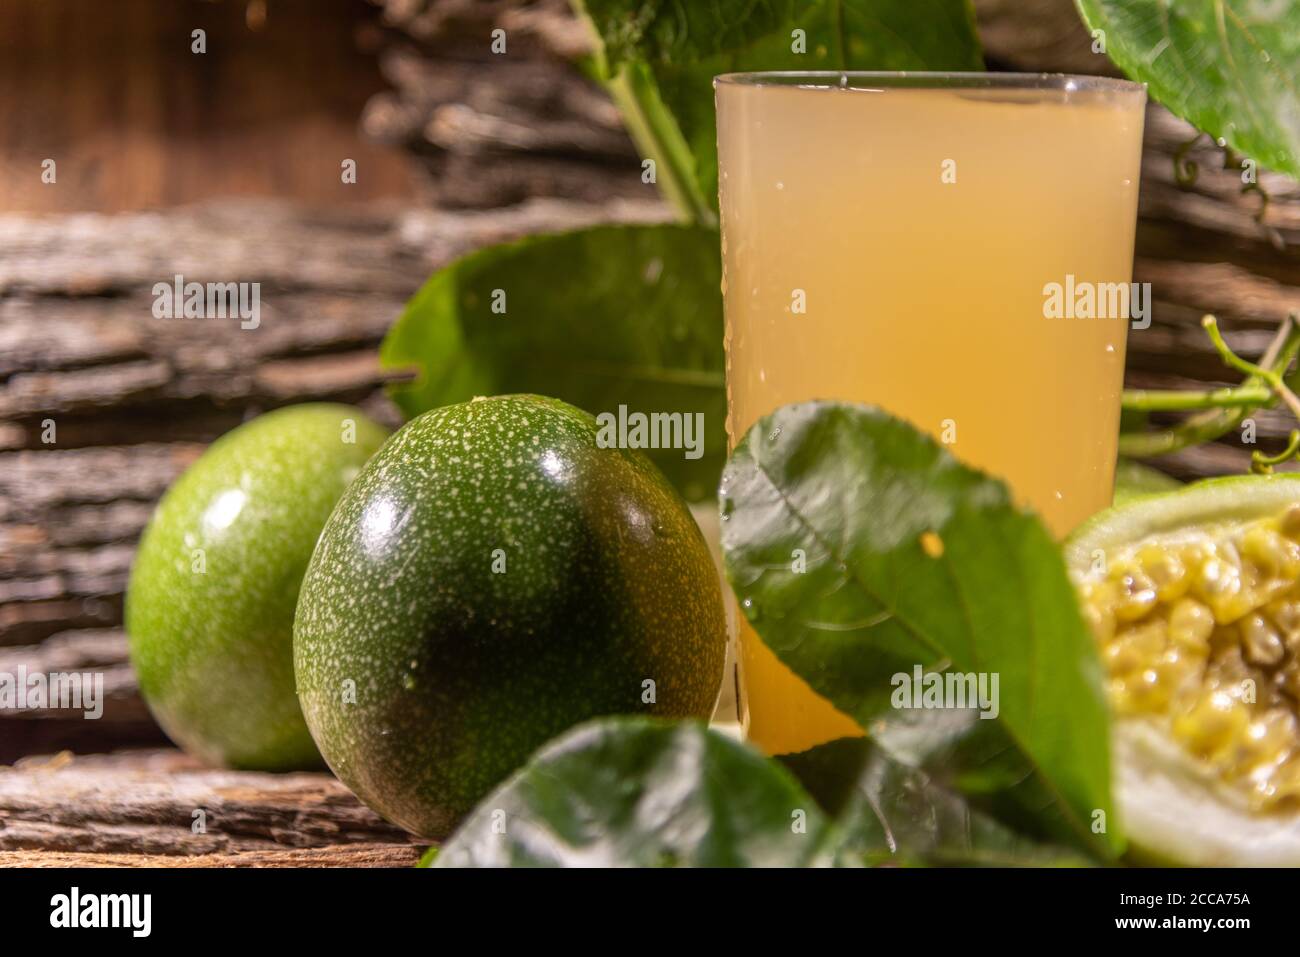 Tropical passion fruit juice. Fruit with essential nutrients for health well-being. Corresponds to a climbing plant of the Passifloraceae family Stock Photo